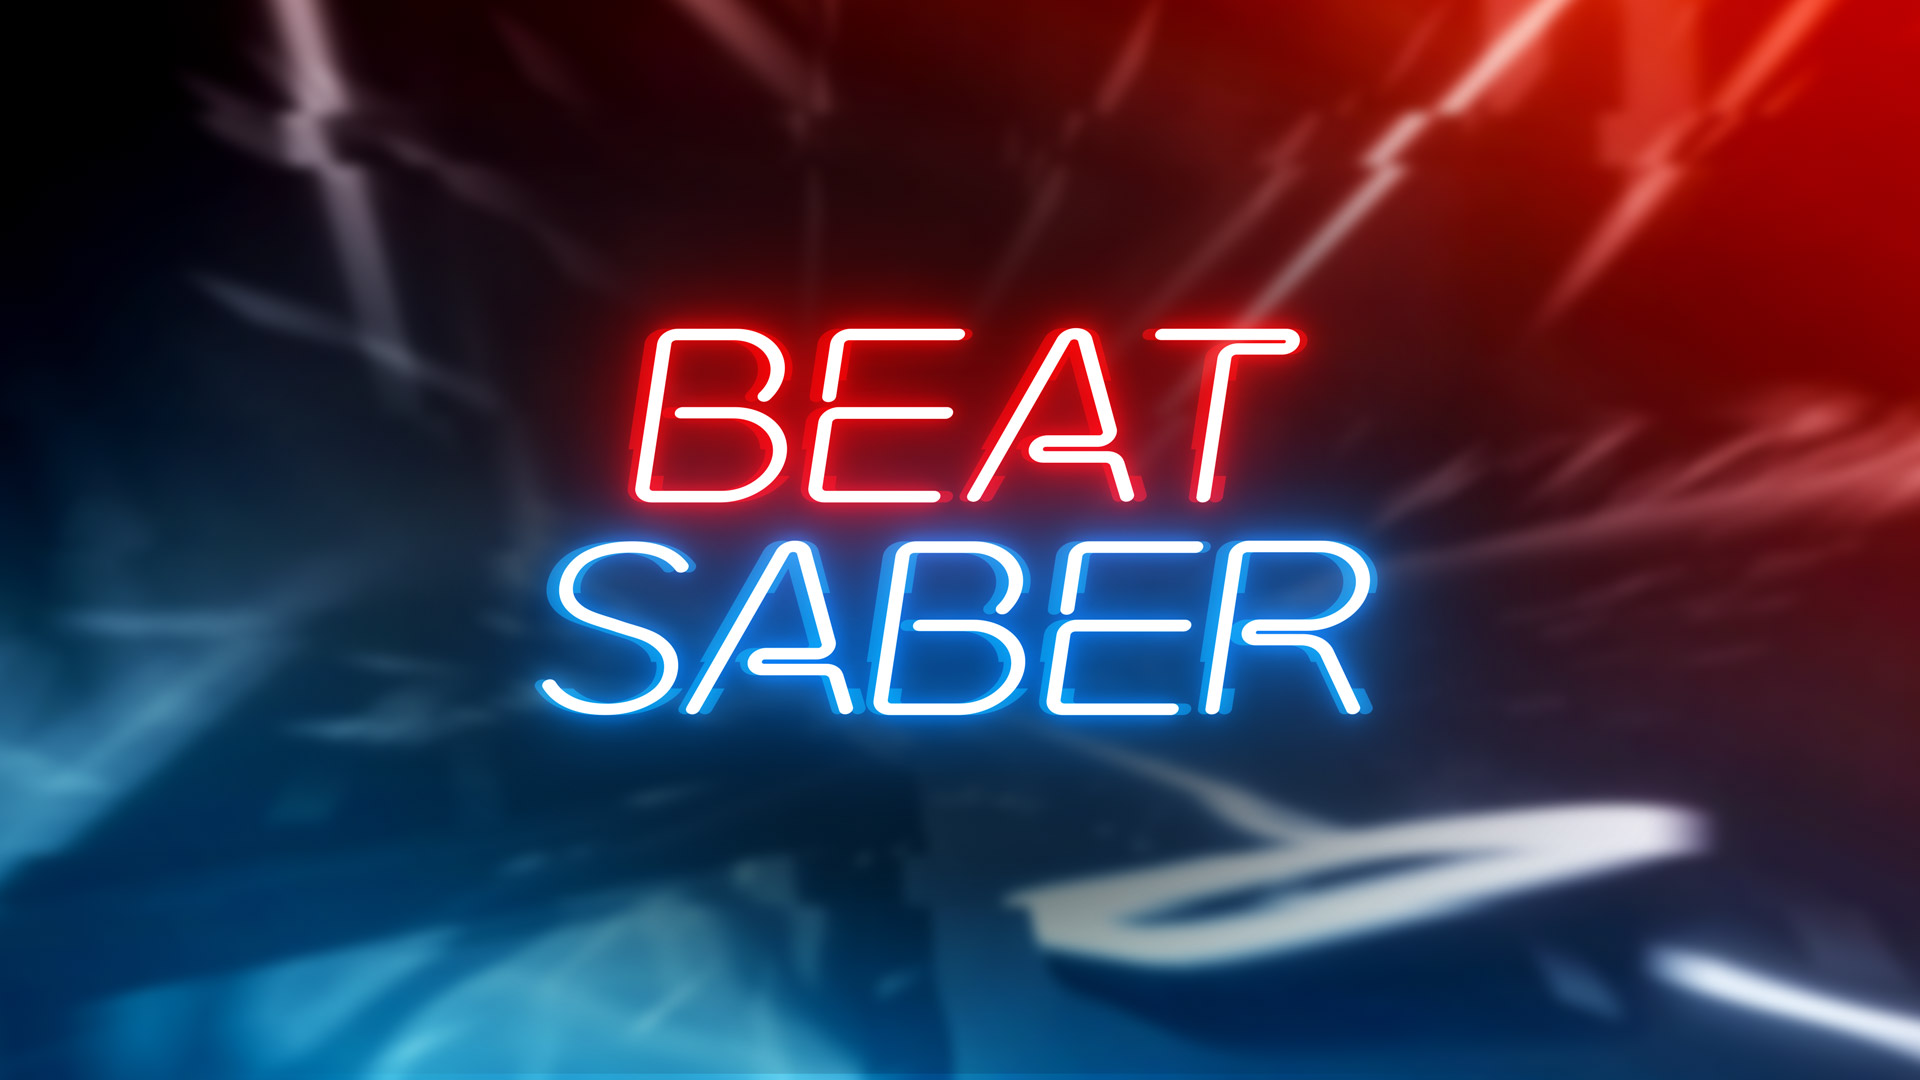 I made a wallpaper where the sabers are Quest 2 controllers  rbeatsaber